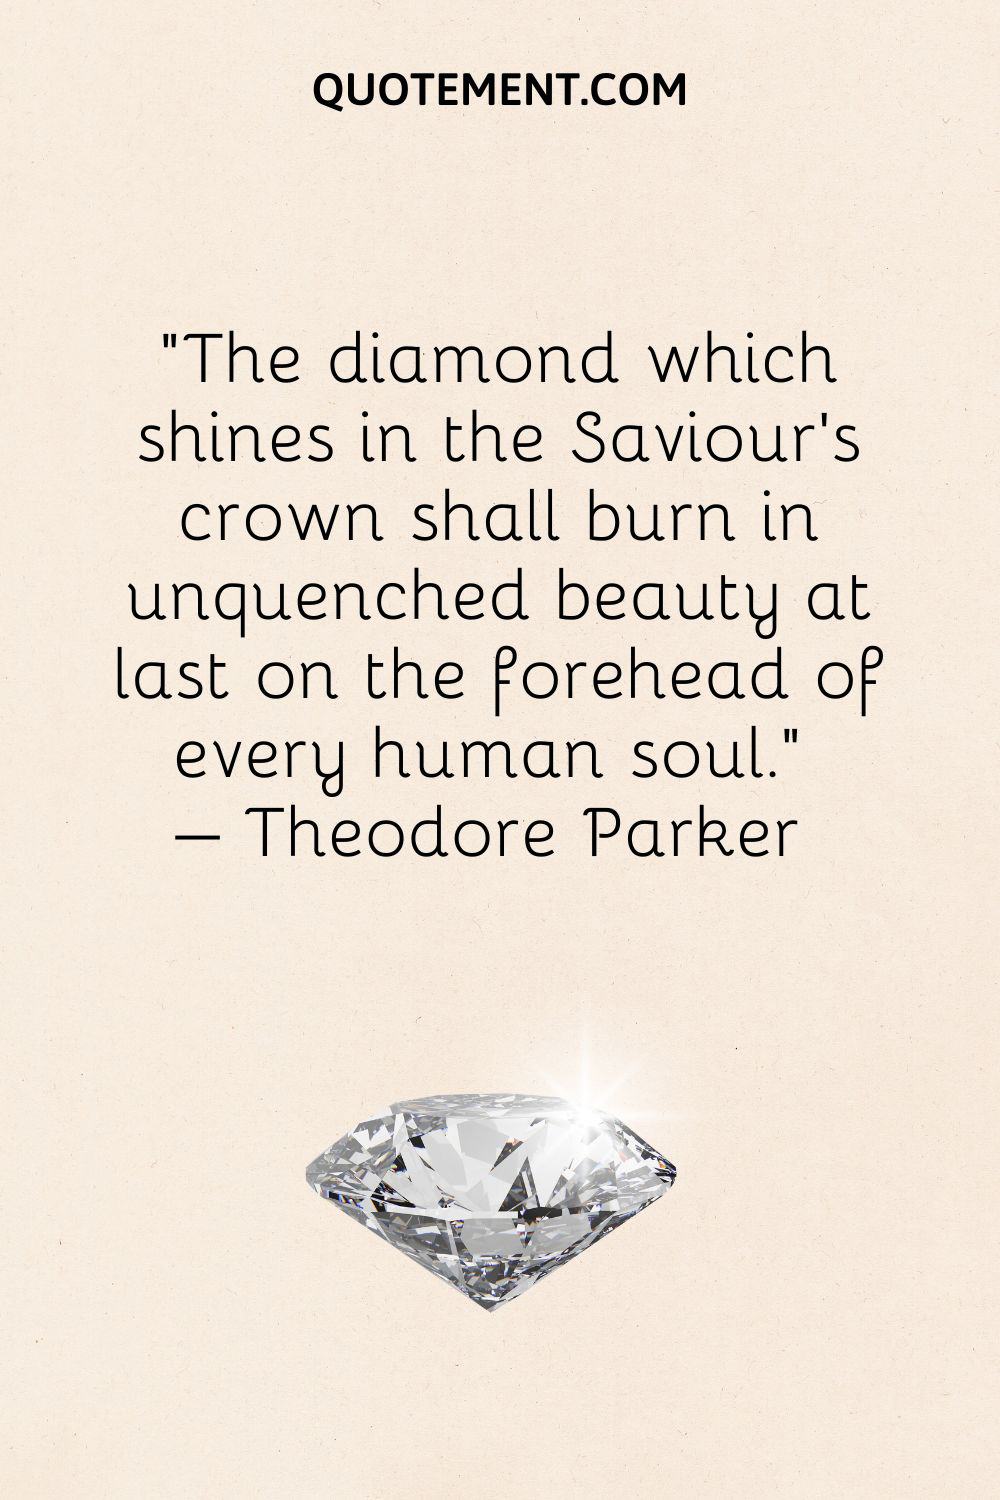 The diamond which shines in the Saviour’s crown shall burn in unquenched beauty at last on the forehead of every human soul.